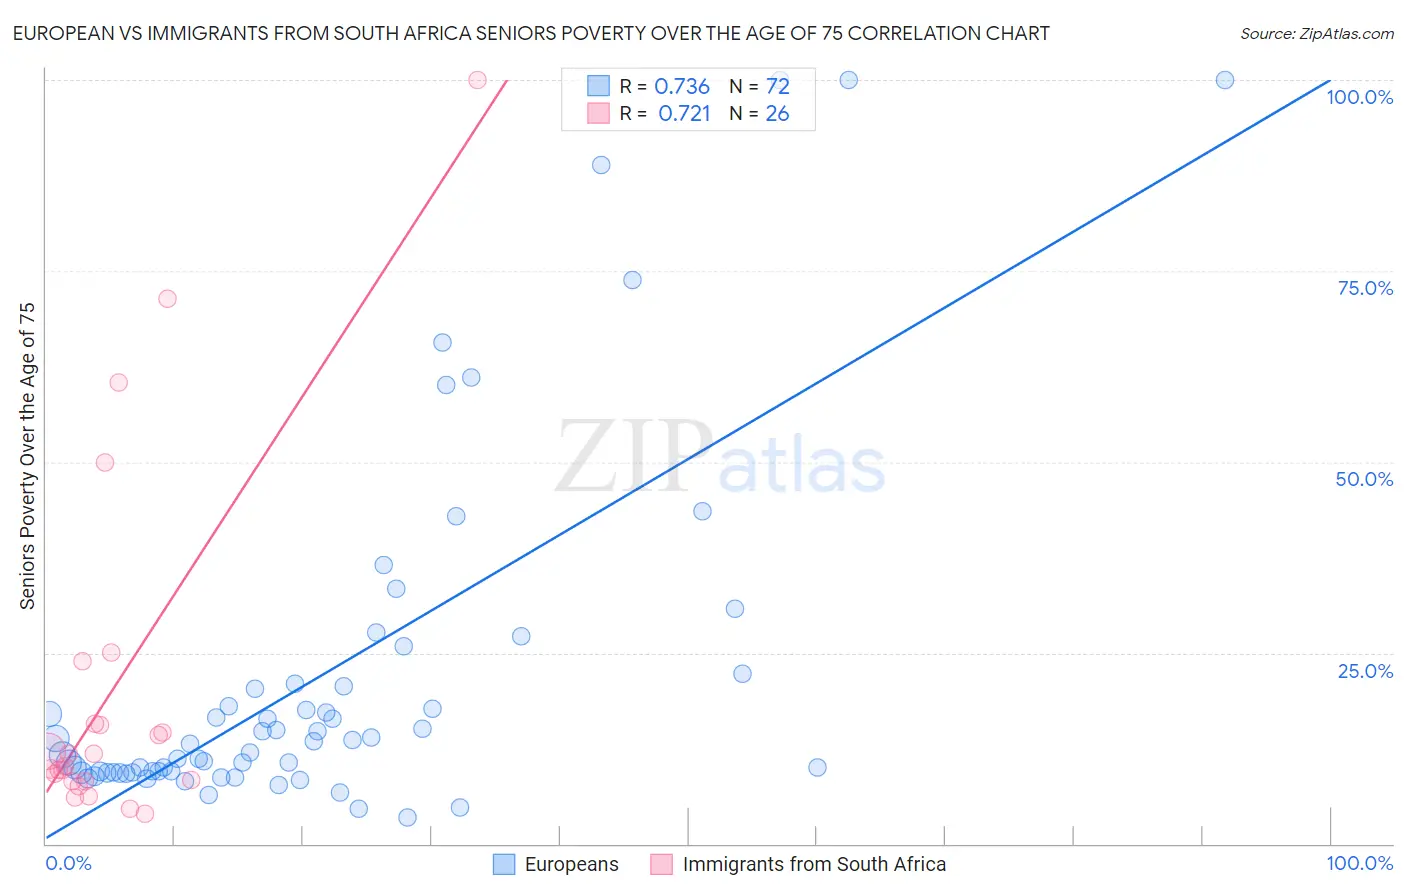 European vs Immigrants from South Africa Seniors Poverty Over the Age of 75